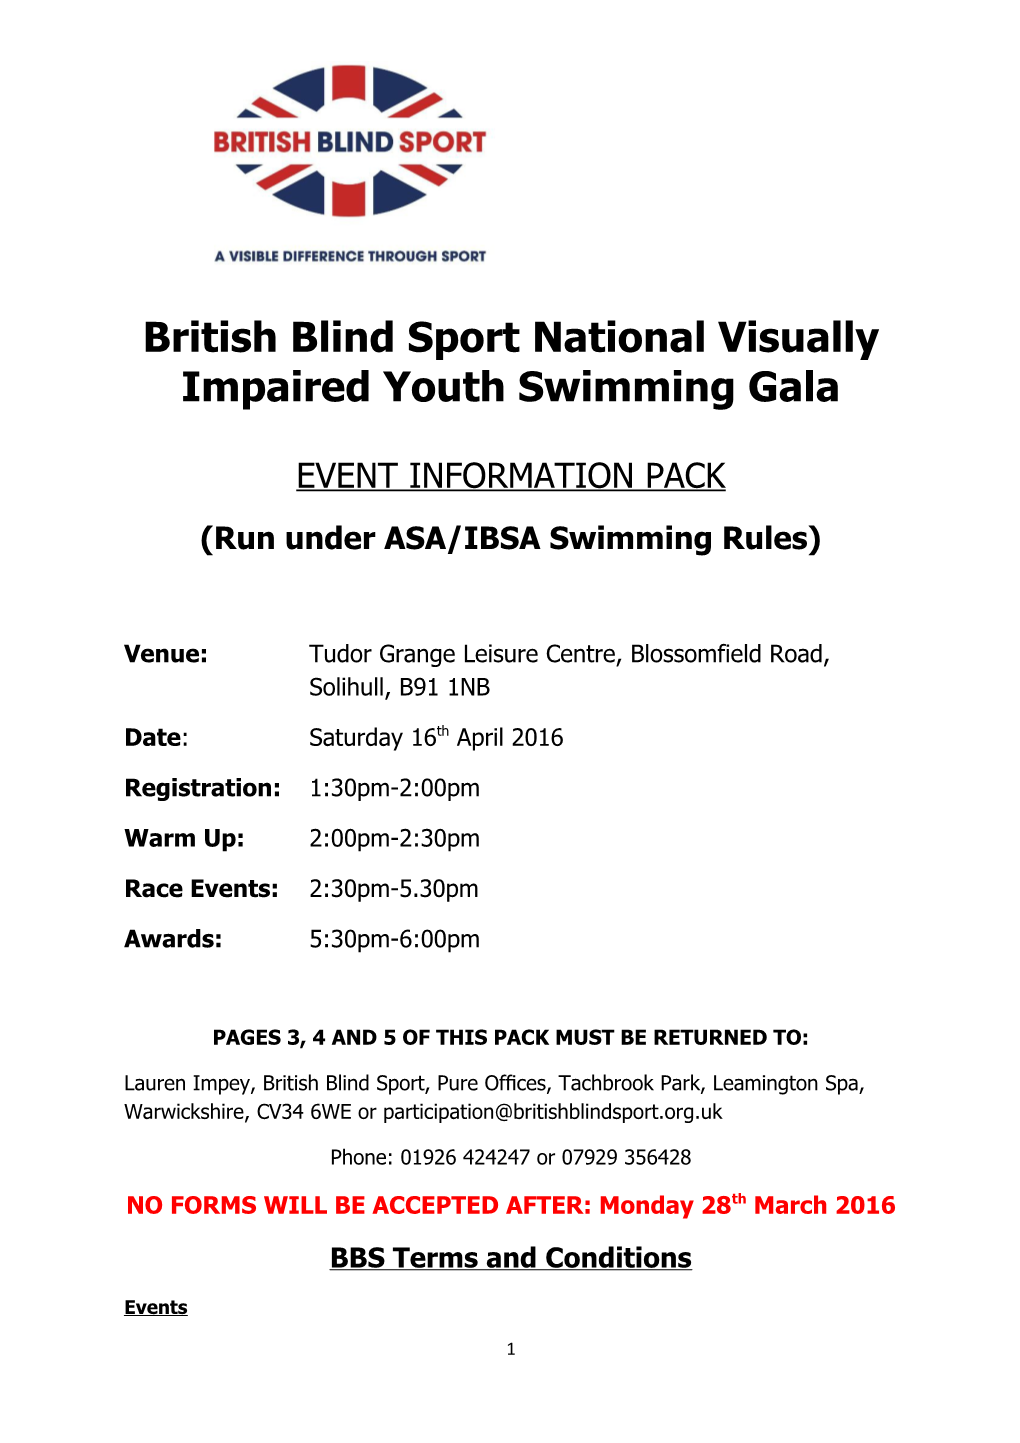 British Blind Sport National Visually Impaired Youth Swimming Gala